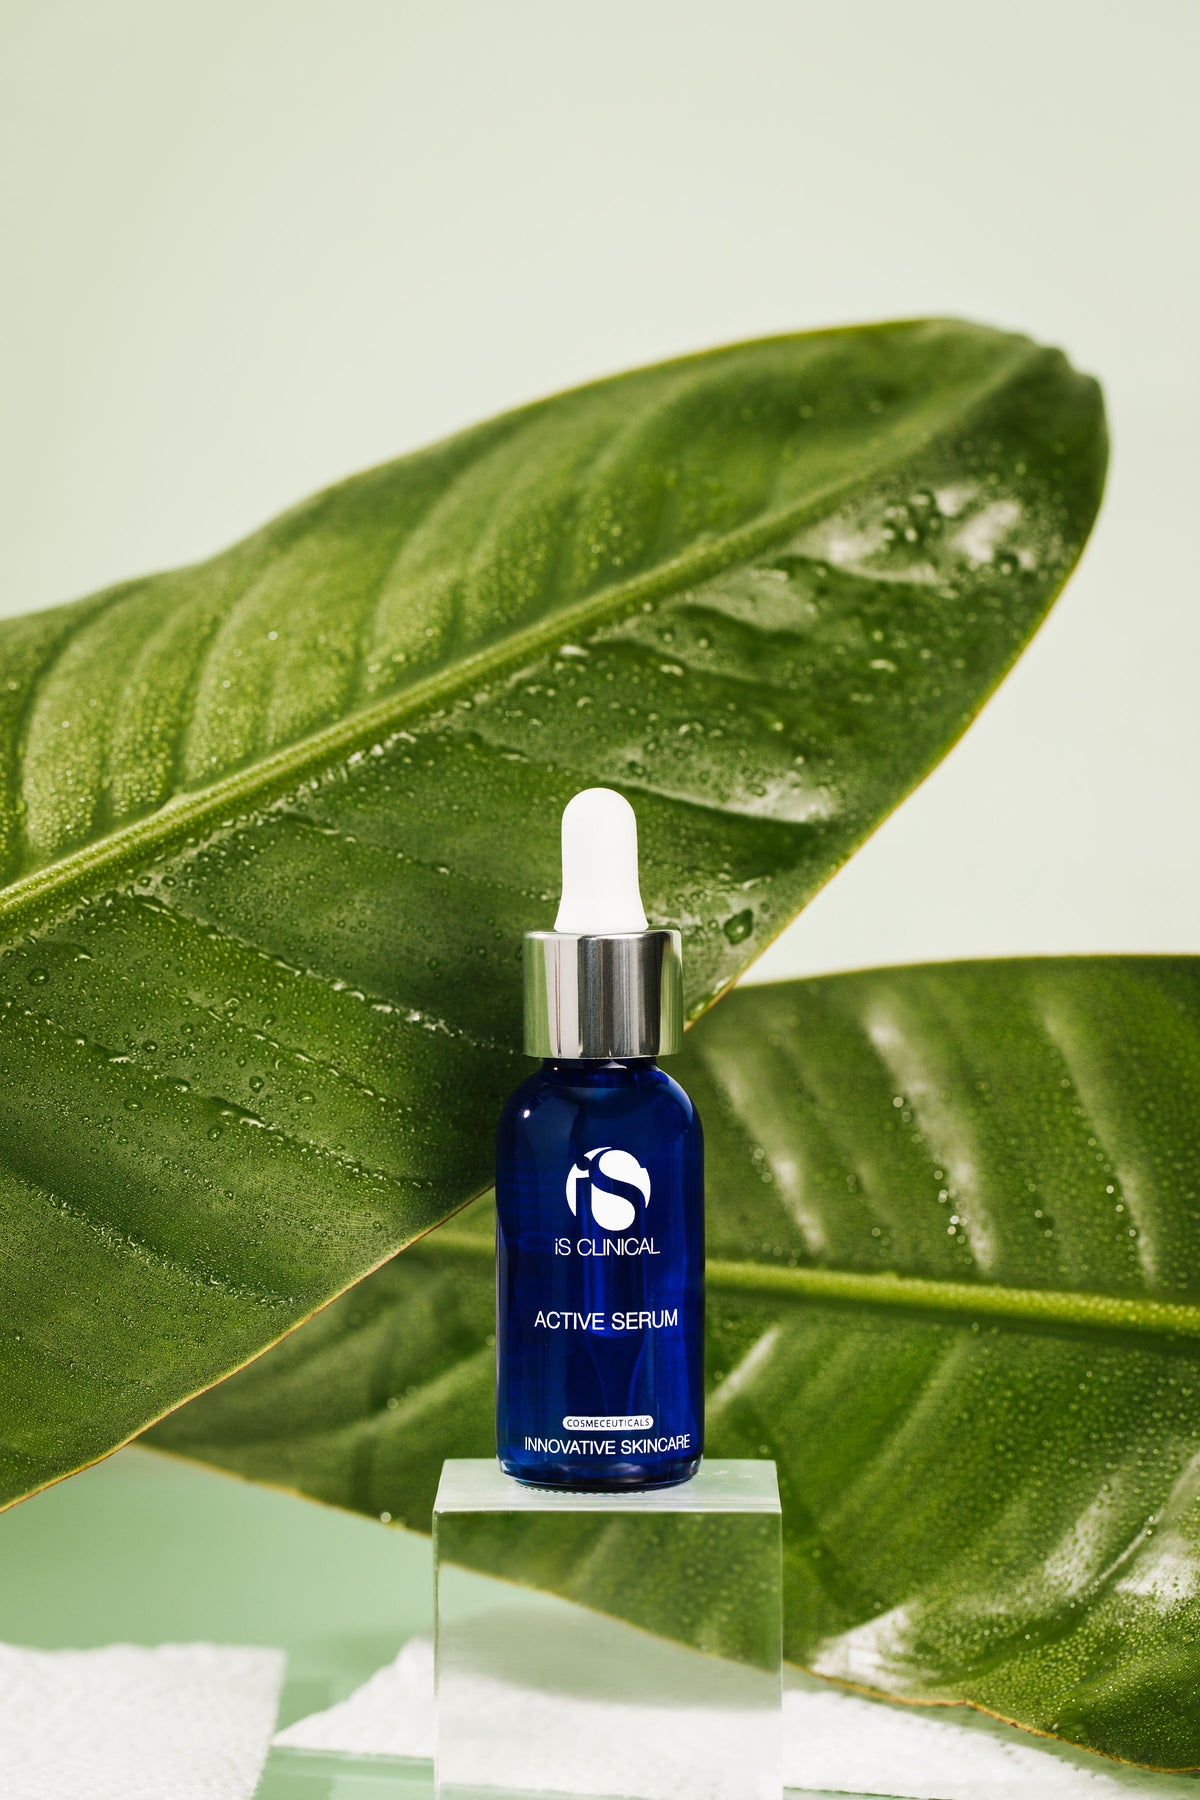 Active Serum - iS CLINICAL